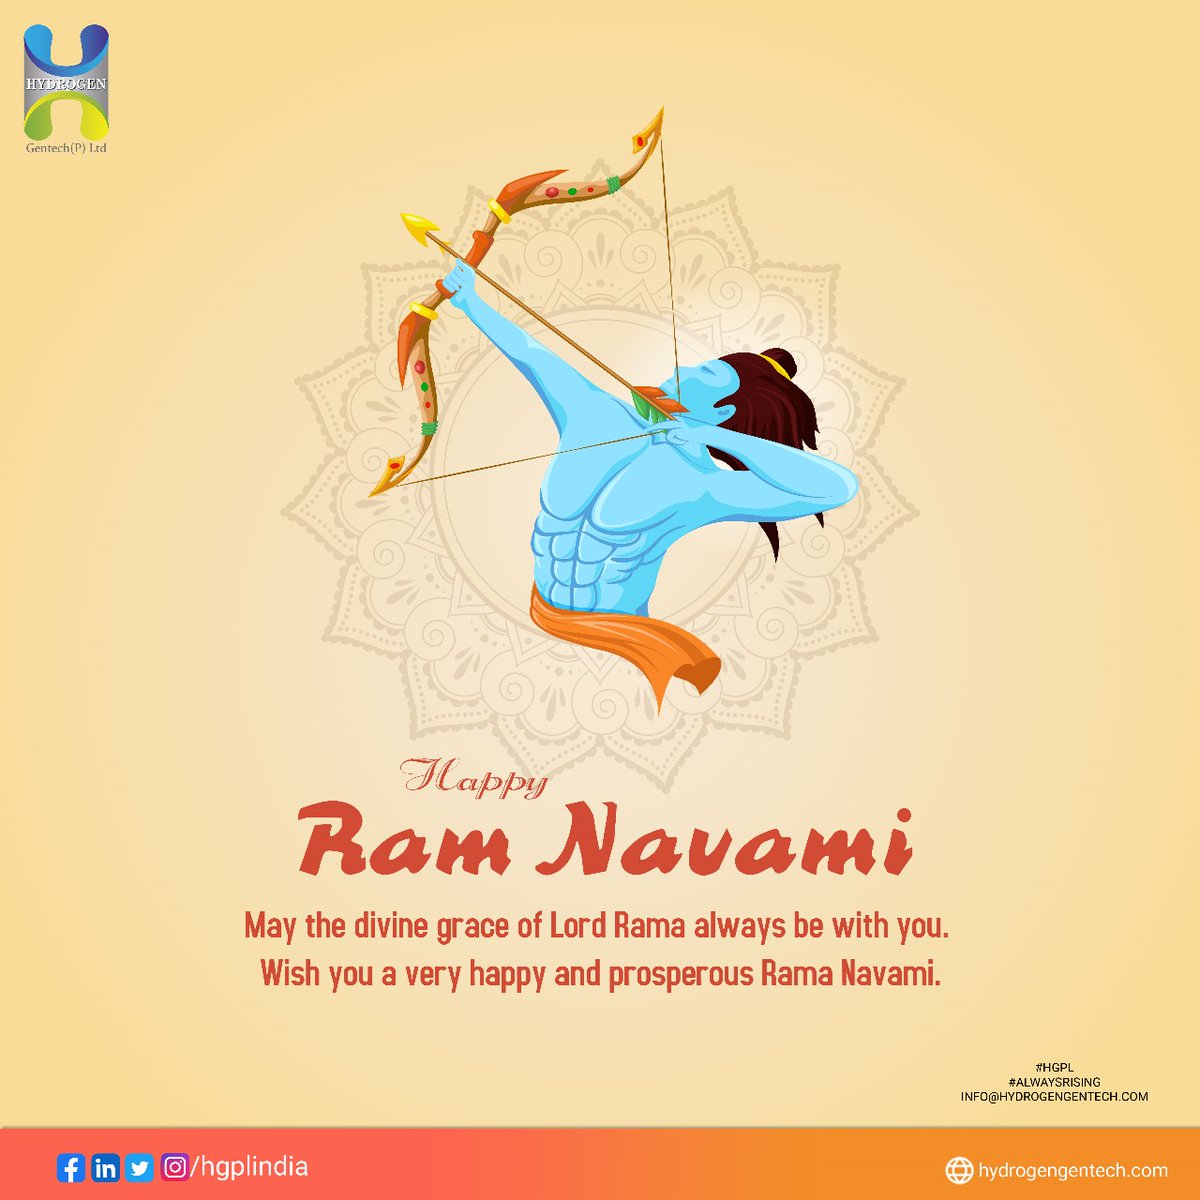 🌼 Embracing the Divine Energy of Ram Navmi! 🙏💫 On this auspicious occasion of Ram Navmi, let's draw inspiration from Lord Rama's virtues of righteousness, harmony, and compassion. Wishing you all peace, prosperity, and divine blessings on this joyous day! #RamNavmi 🌱🕊️🌟